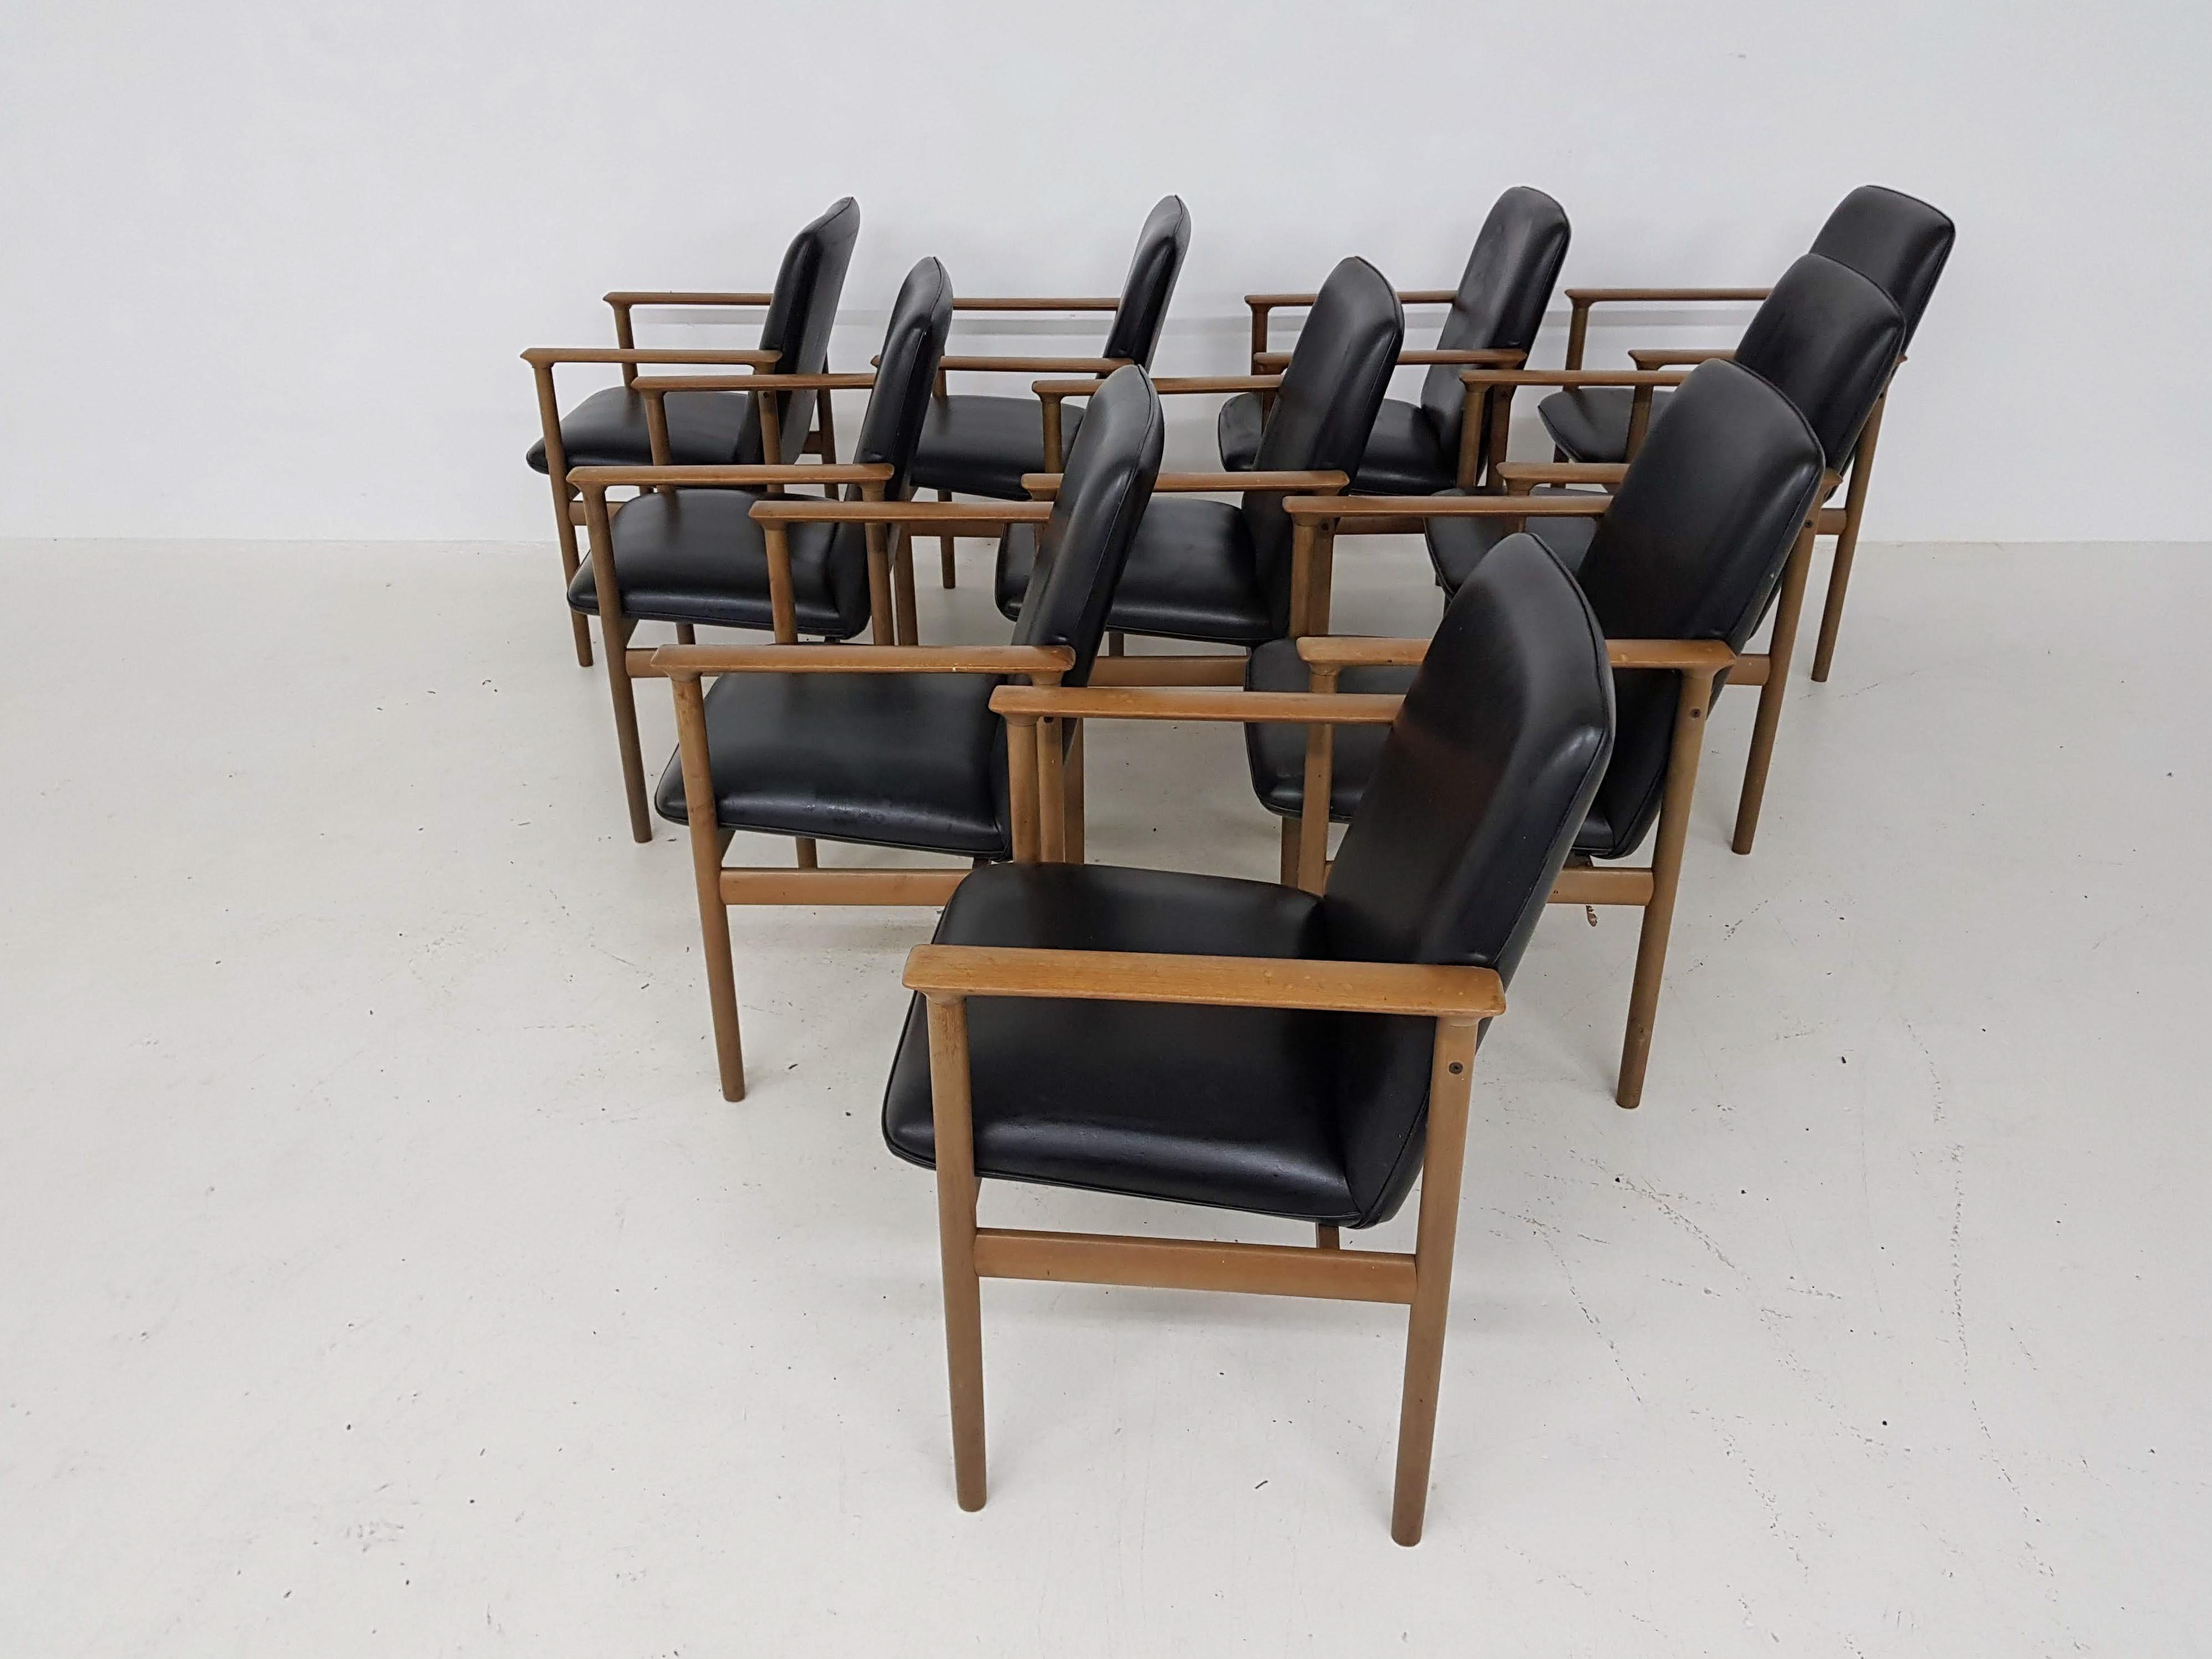 Wooden dining chairs with black vinyl upholstery from Dutch origin. Some have some small traces of use in the vinyl upholstery. We can have them re-upholstered, ask us about the possibilities

We have 1 chair available!

Measures: Height: 90 cm;